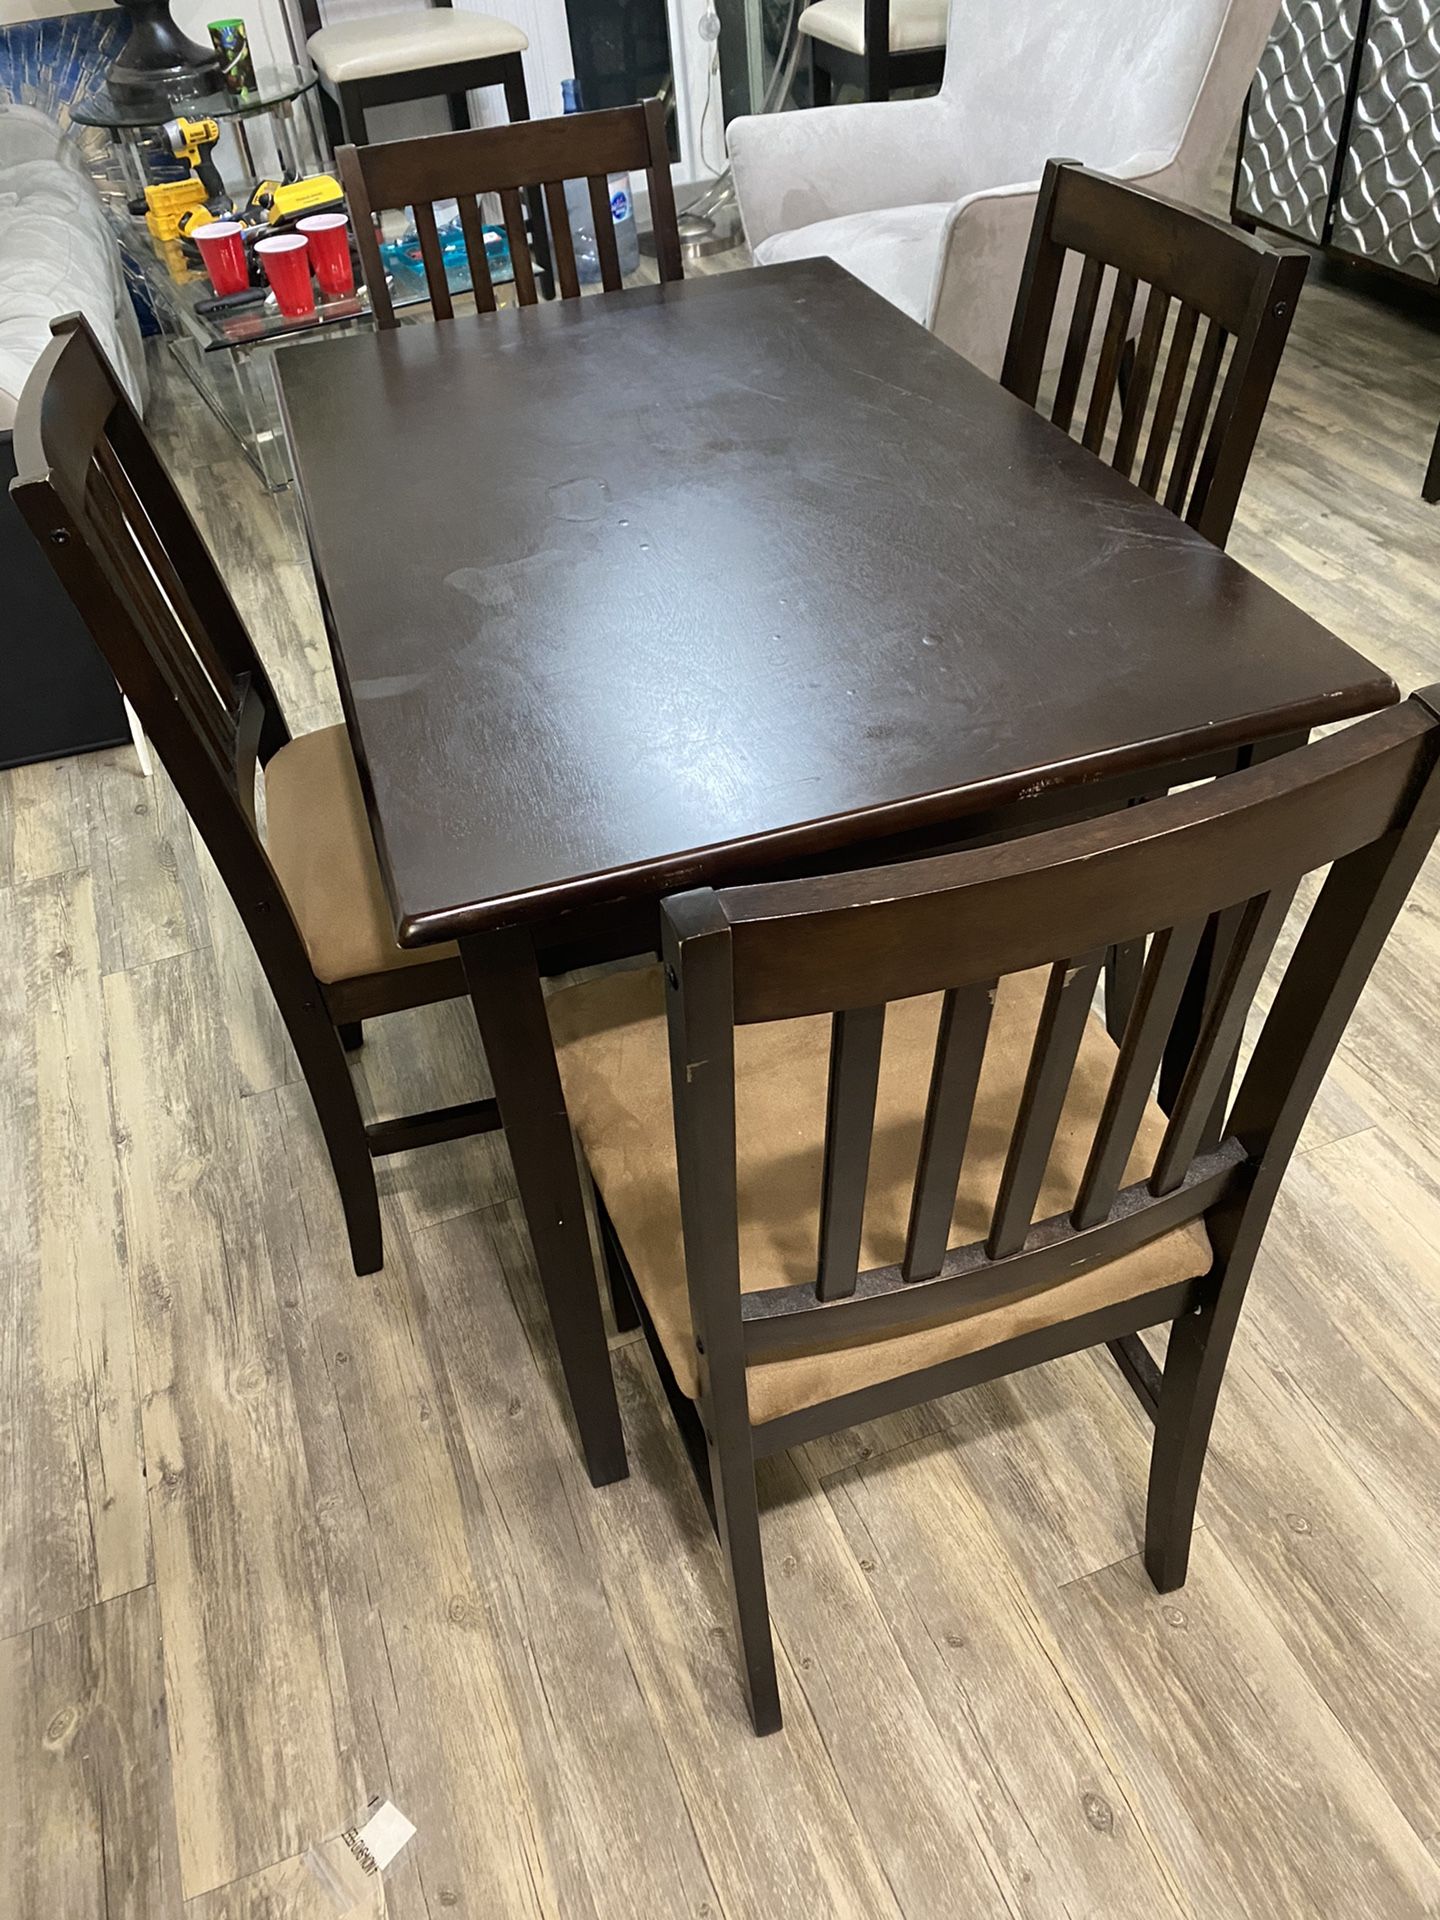 Dining table with four chairs. All chairs and table in good condition.